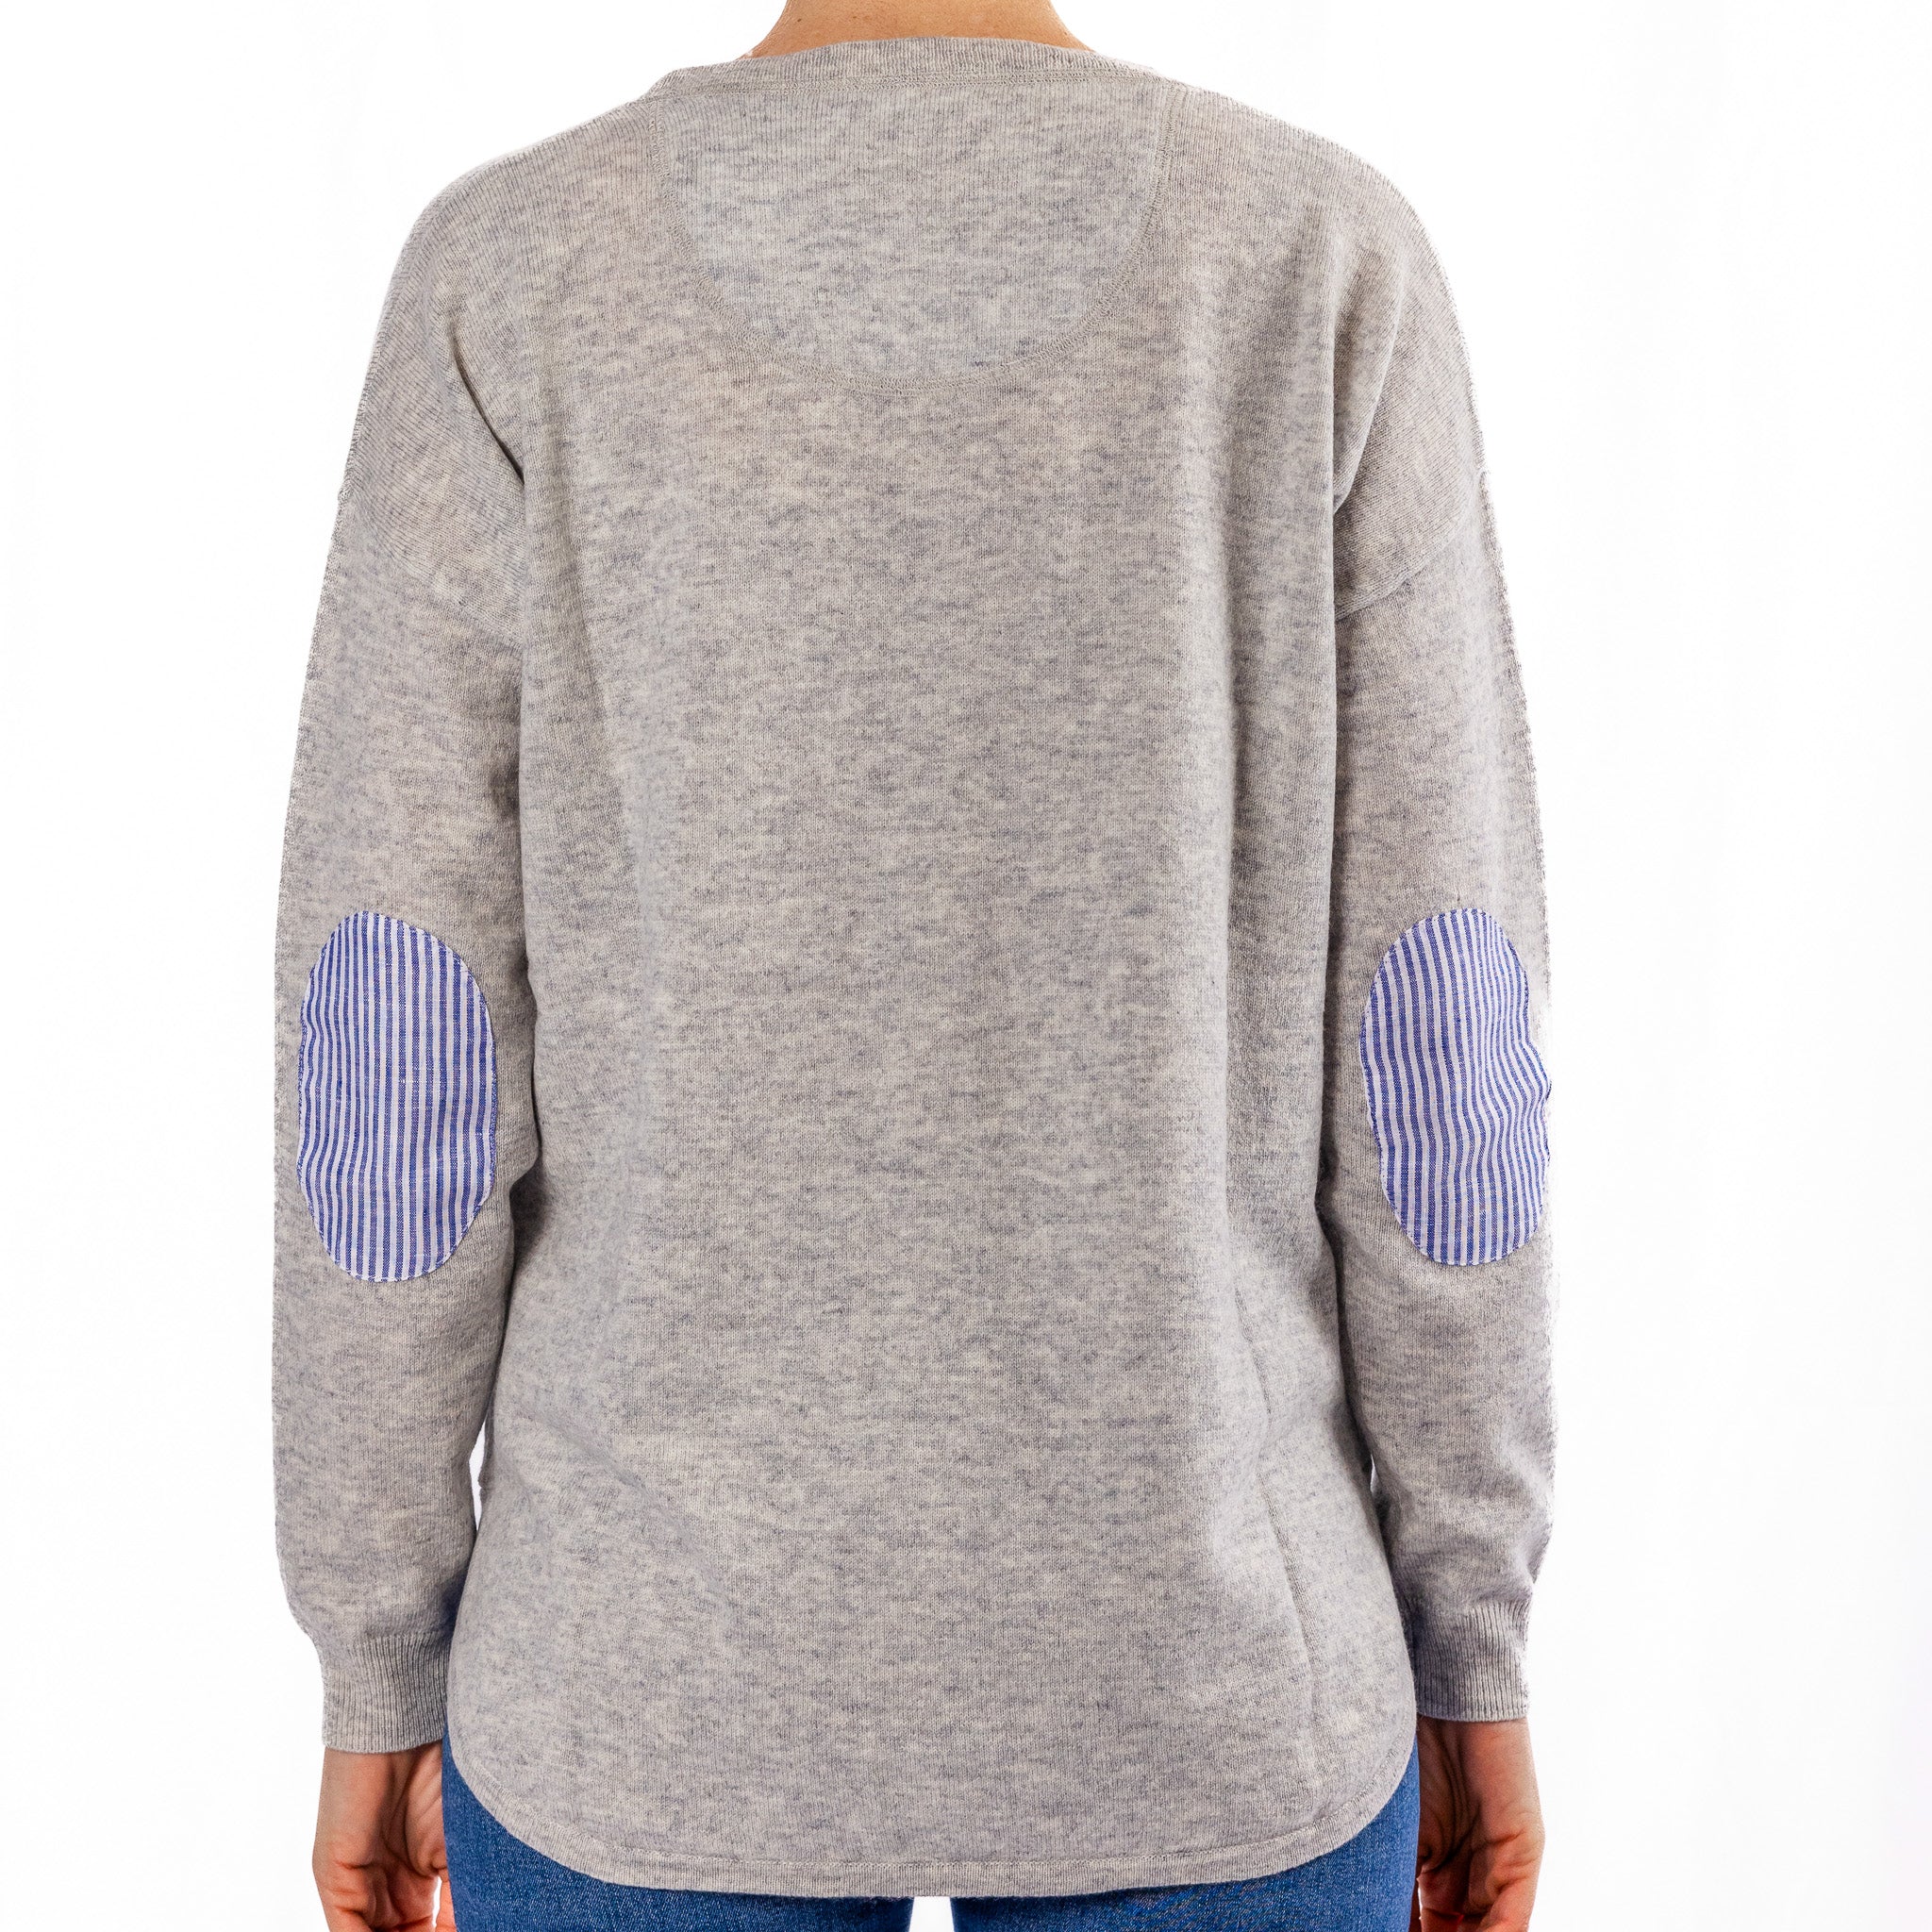 Grey Swing Jumper with Blue and White Stripe Patches